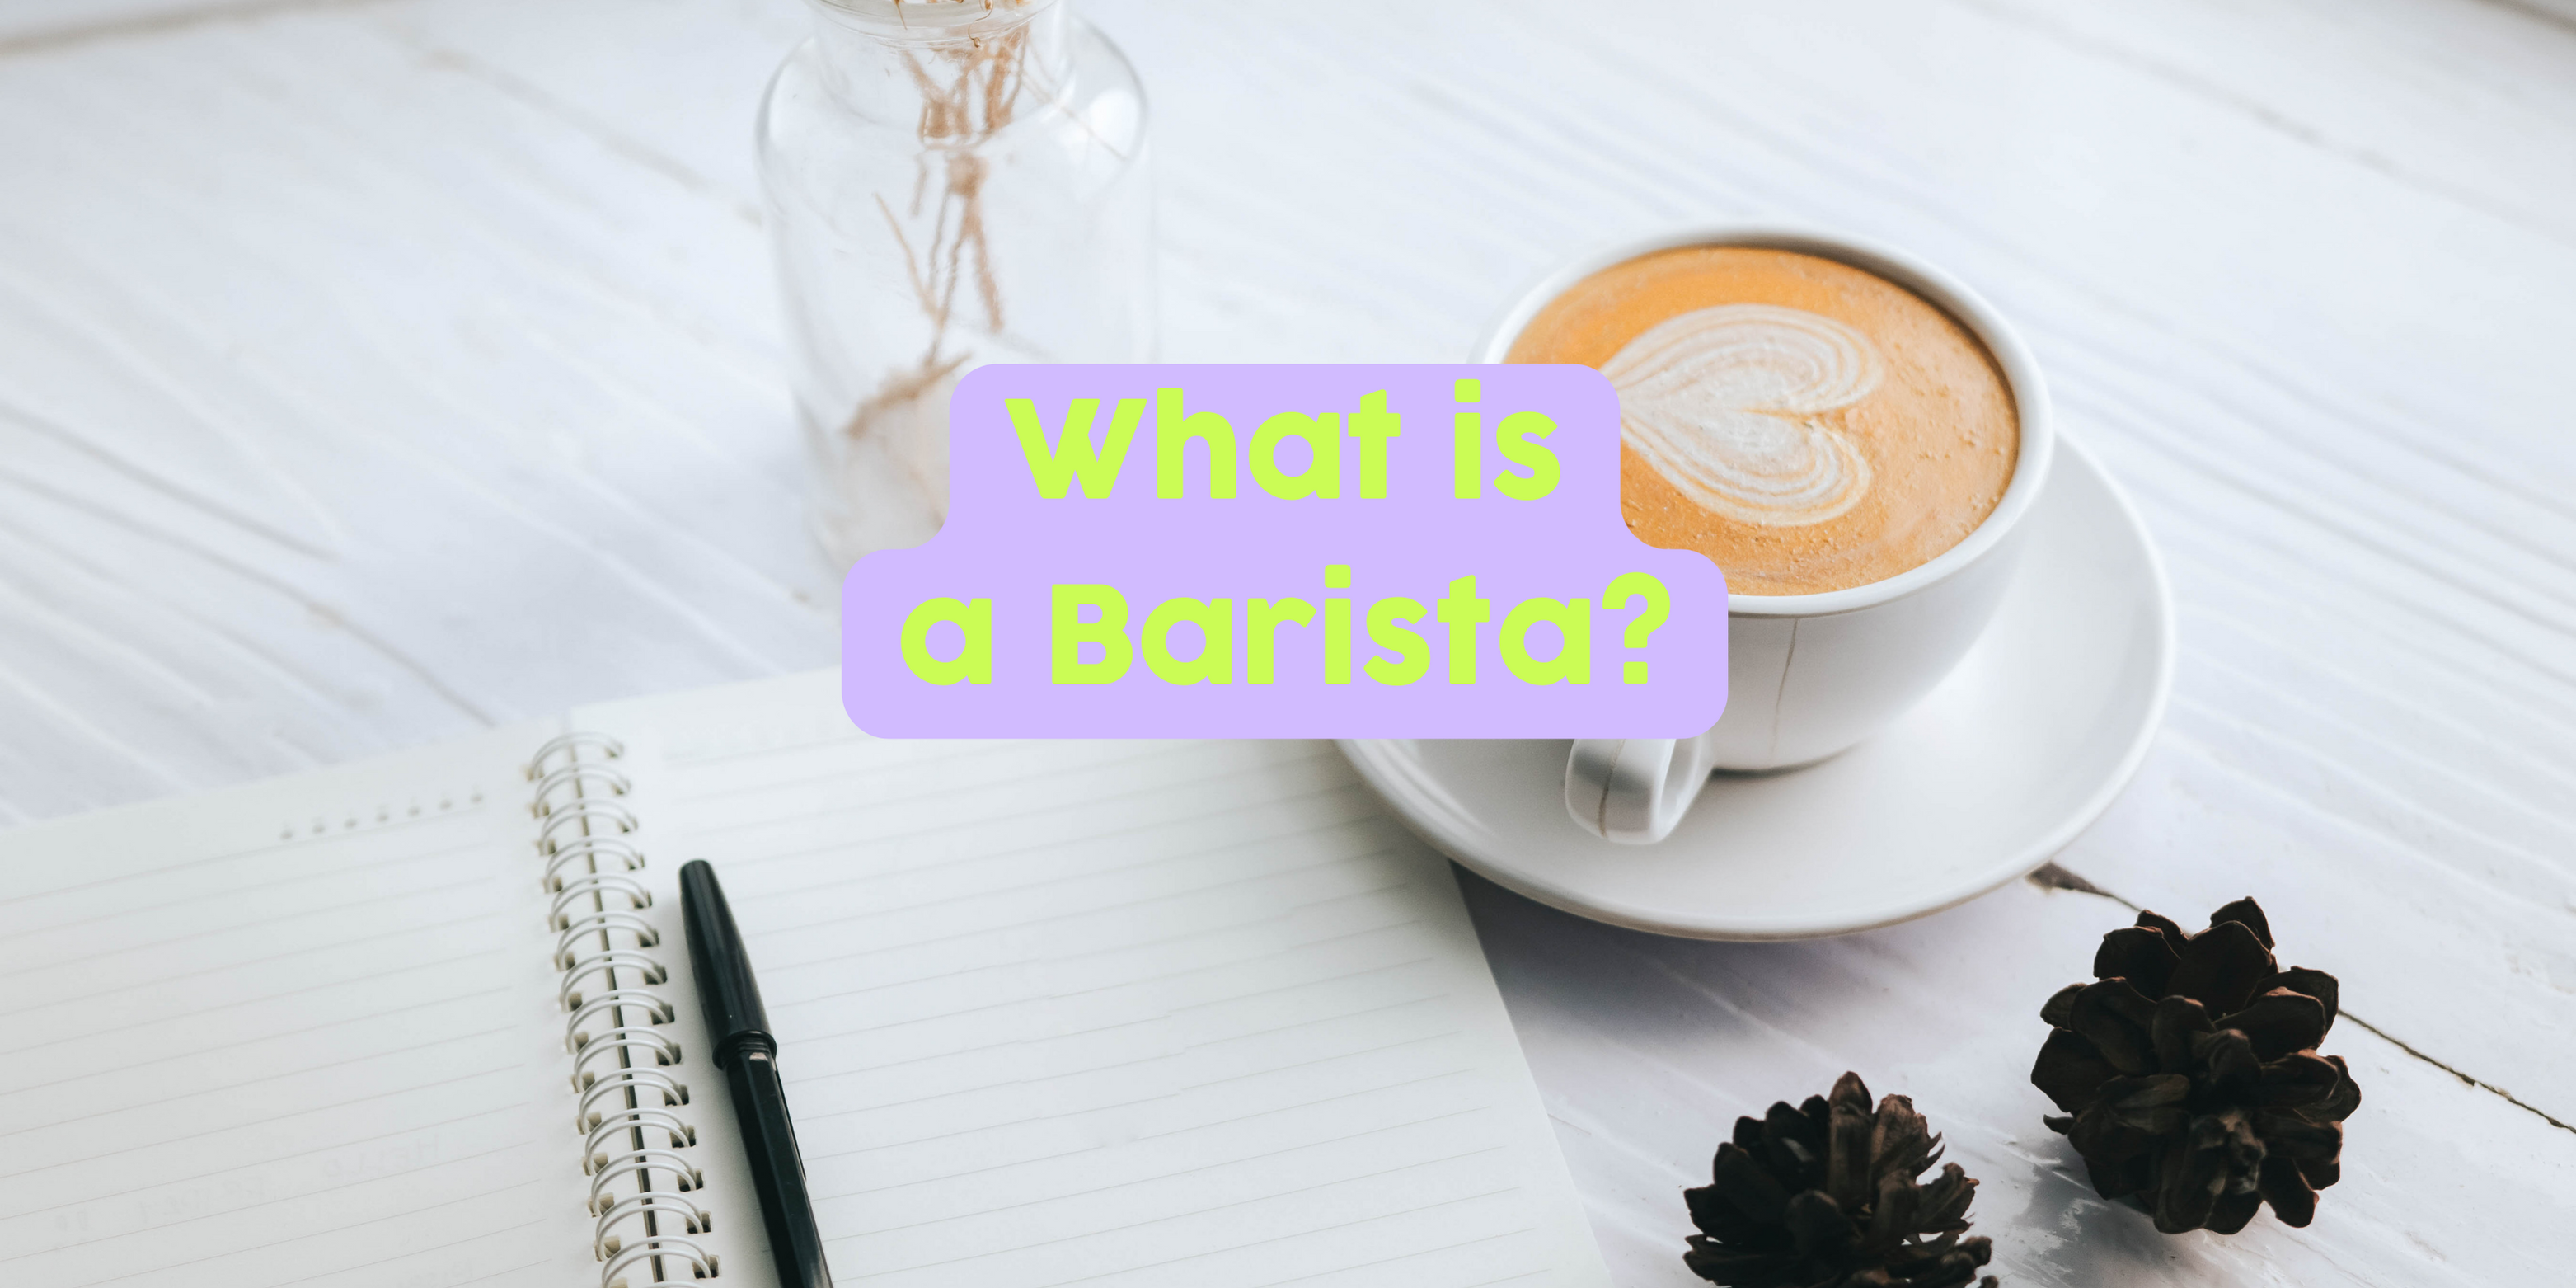 What is a Barista?